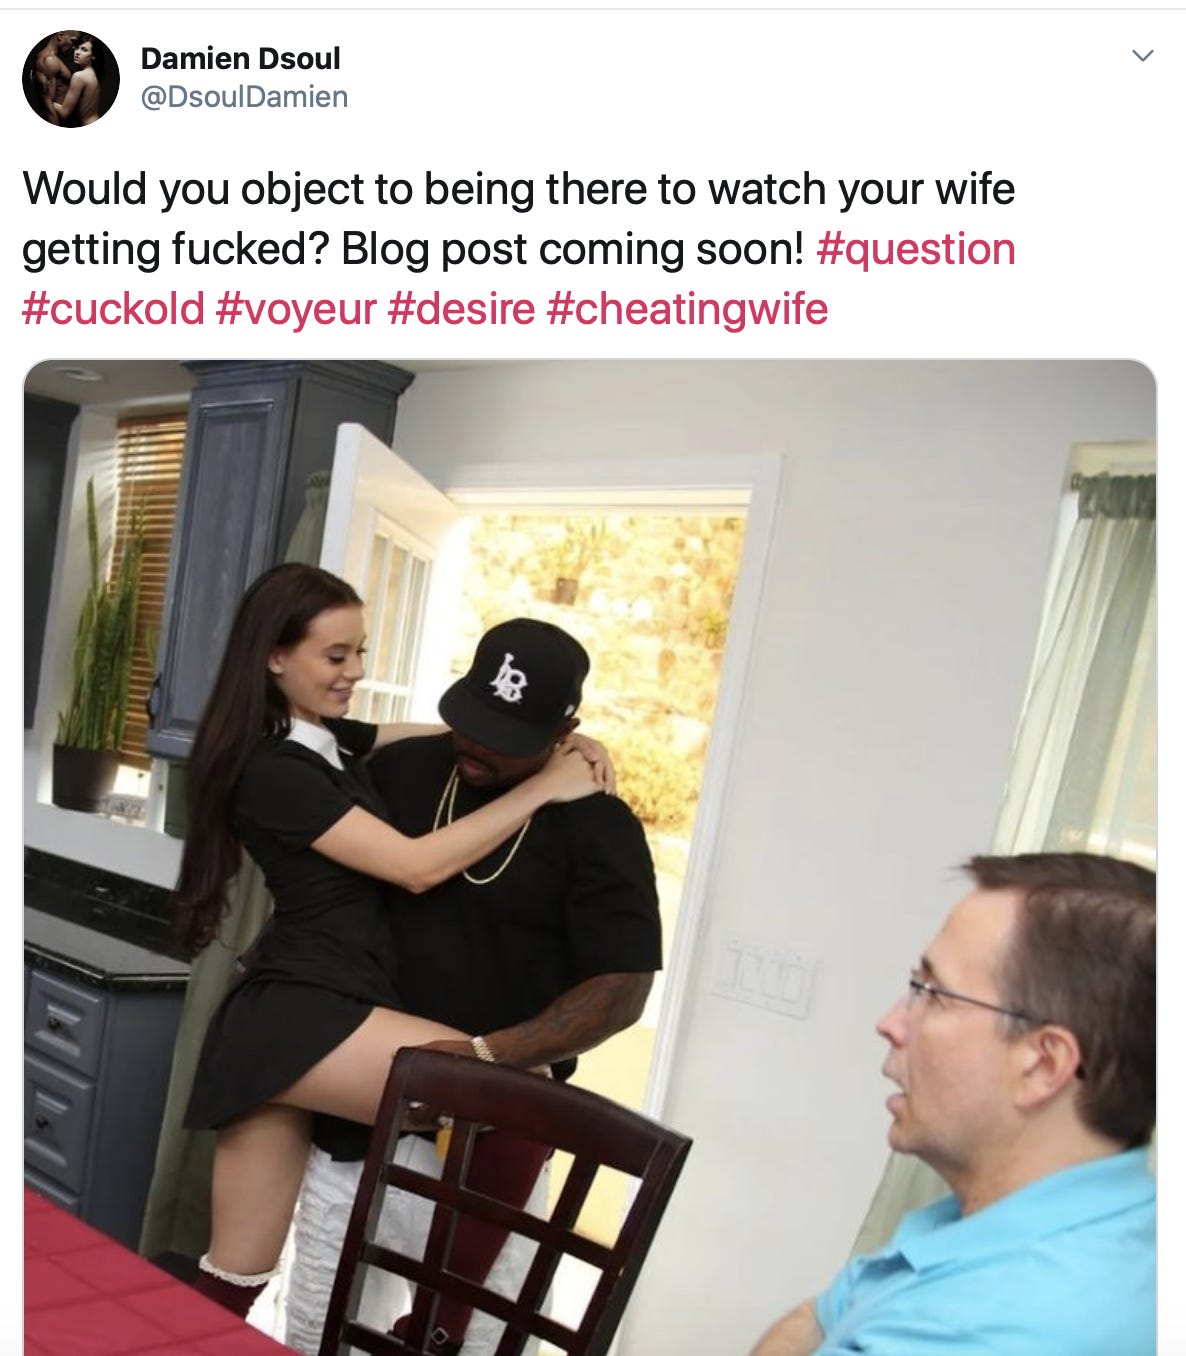 carrie beckmann recommends want to watch wife have sex pic